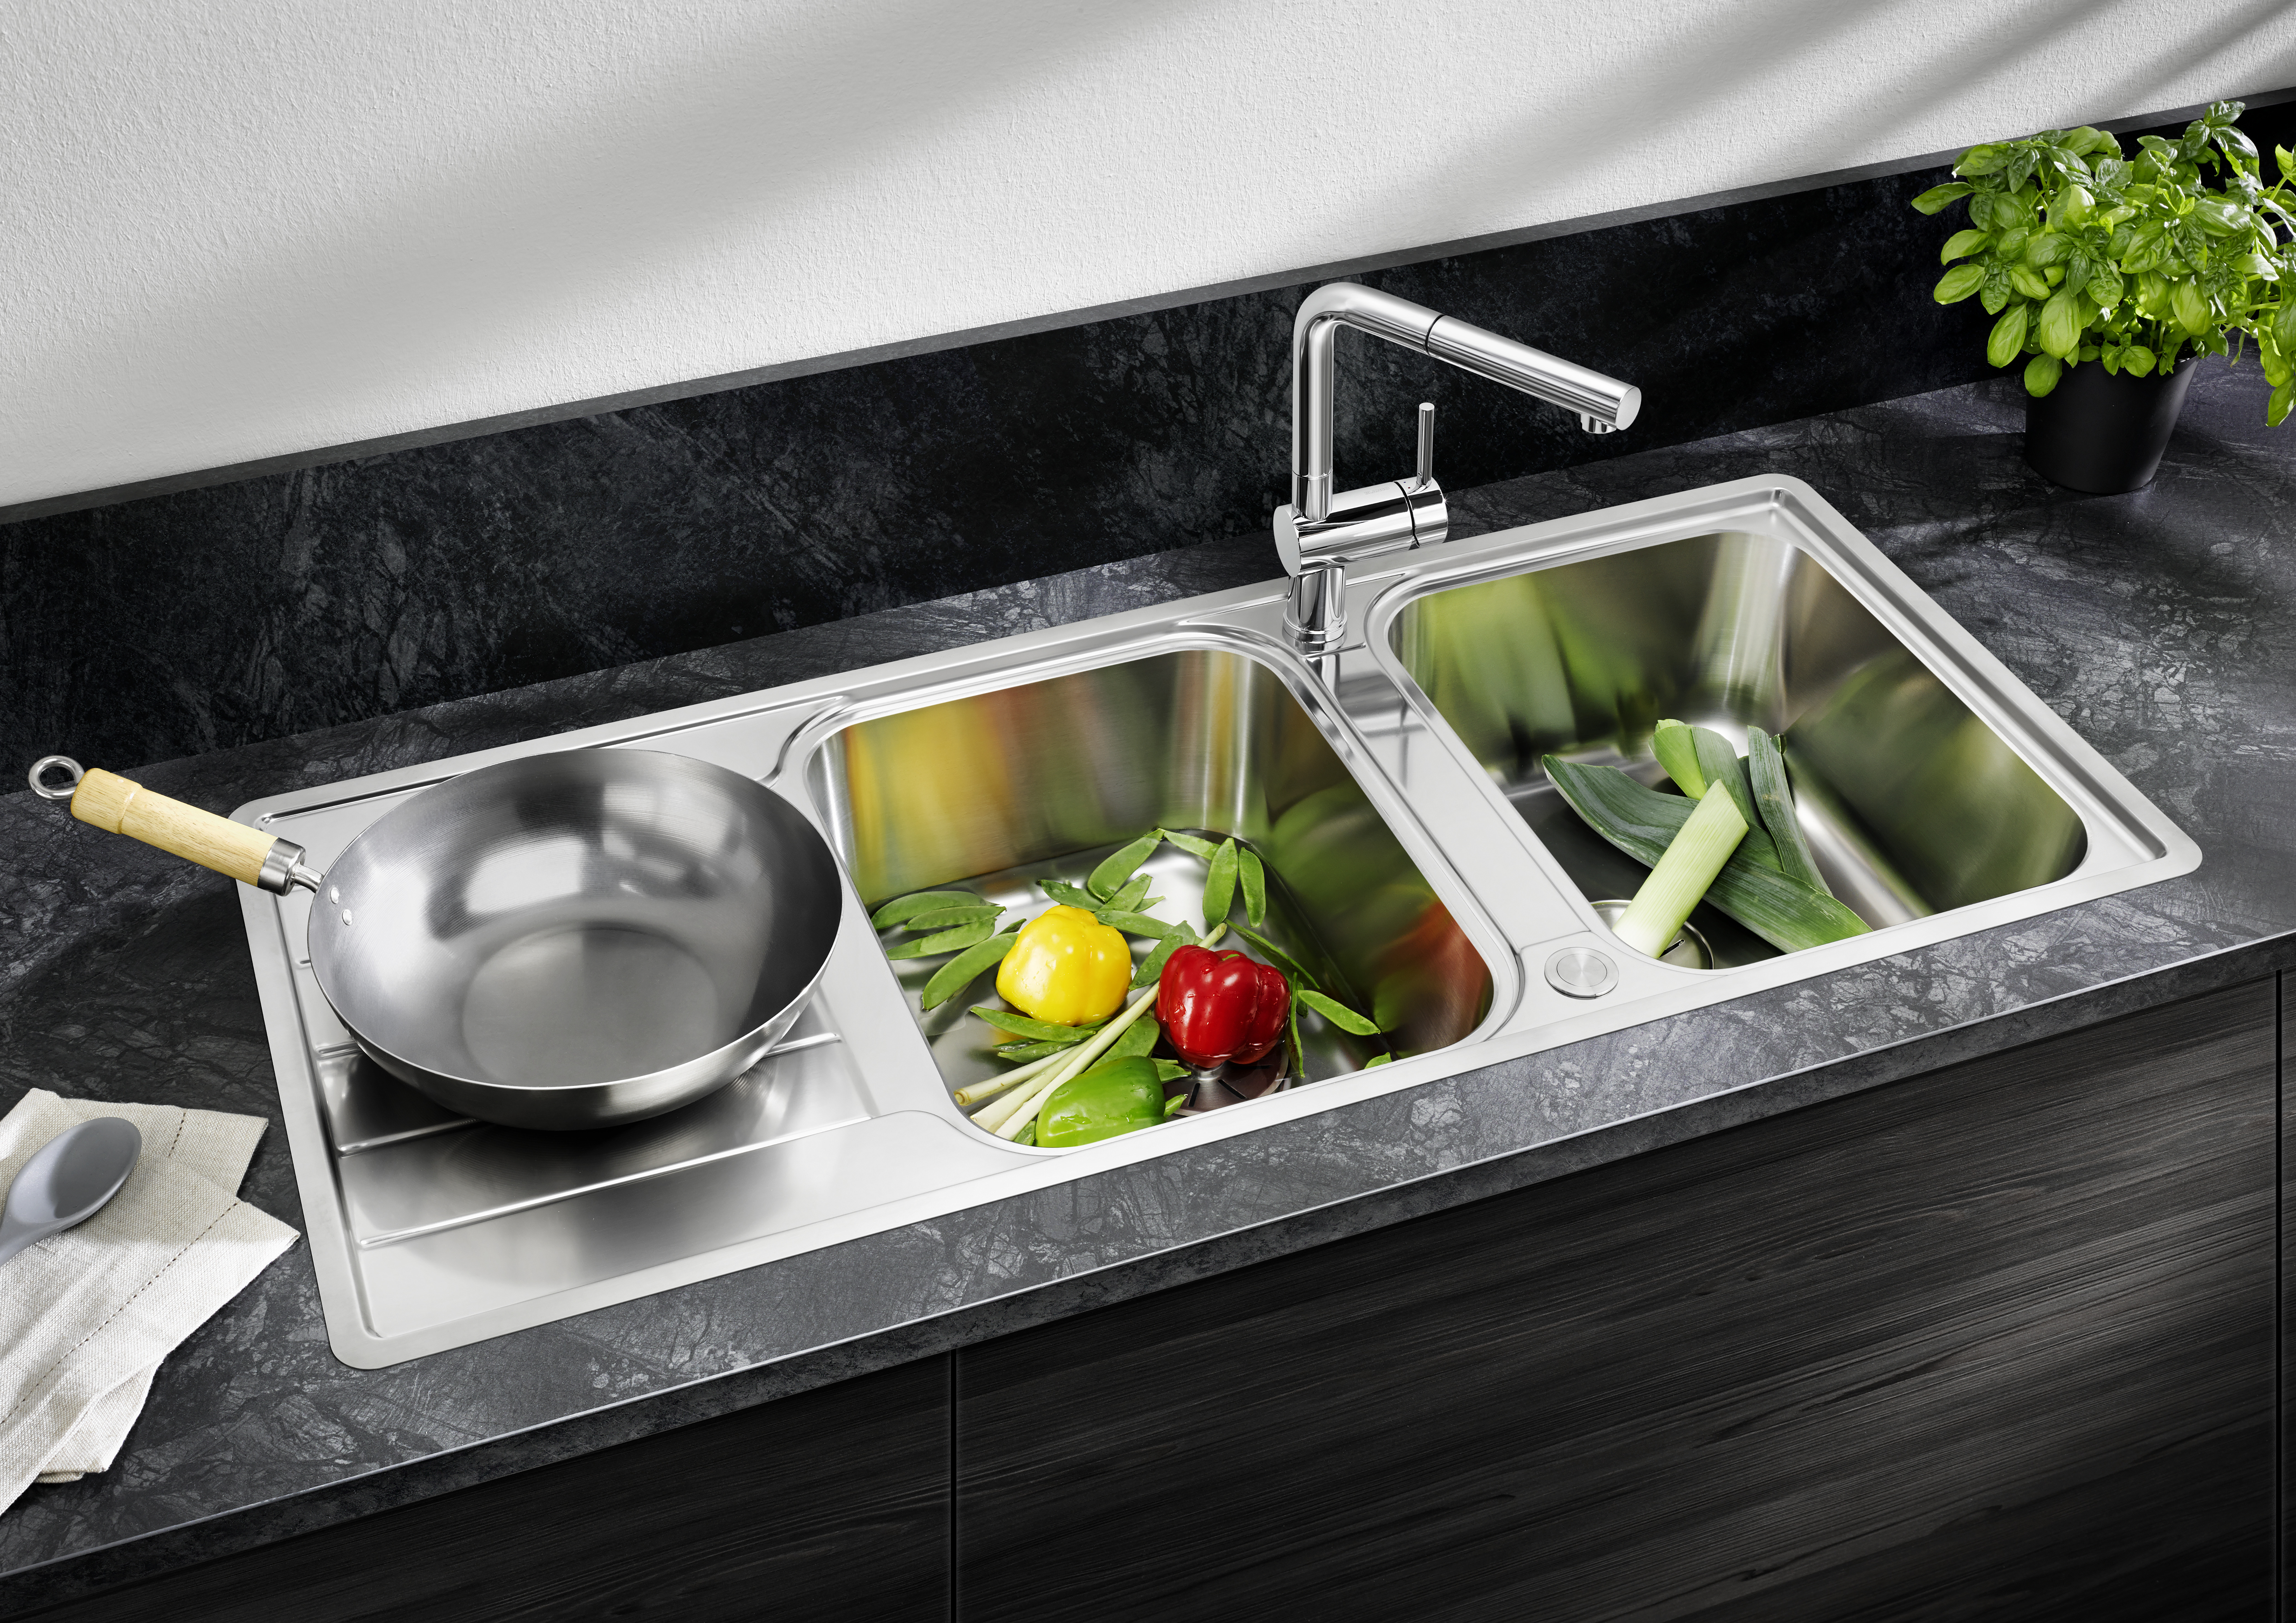 If you have two bowls in your sink, it is advisable to fit the mixer tap in the centre.